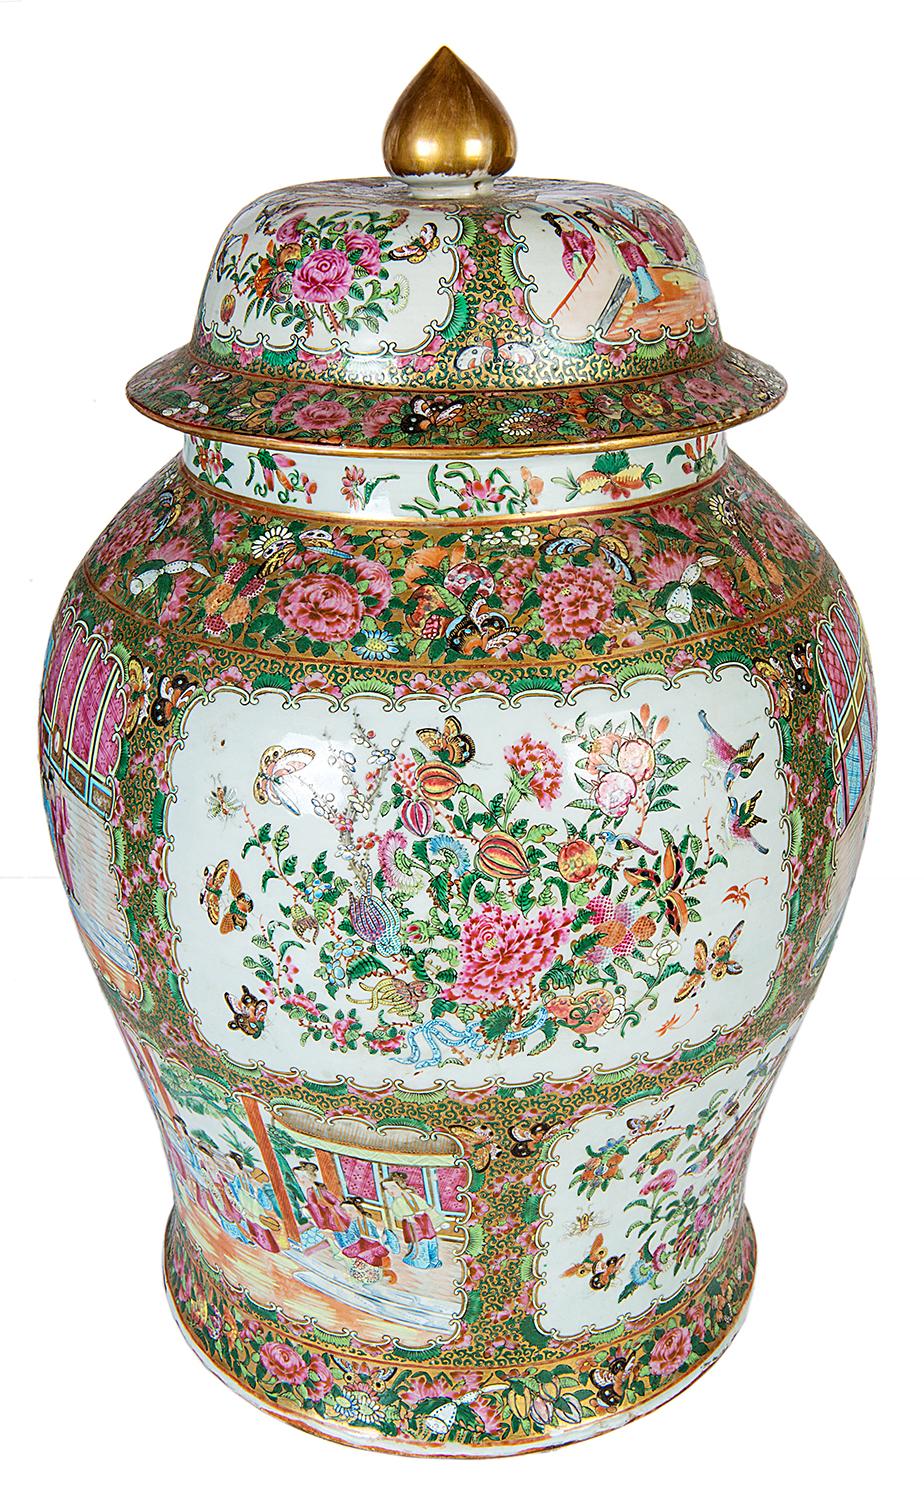 A large and impressive 19th century Chinese Cantonese / rose medallion lidded vase, having a gilded finial to the lid, green and pink floral and foliate boarders to the inset panels depicting classically dress Chinese people socializing in the